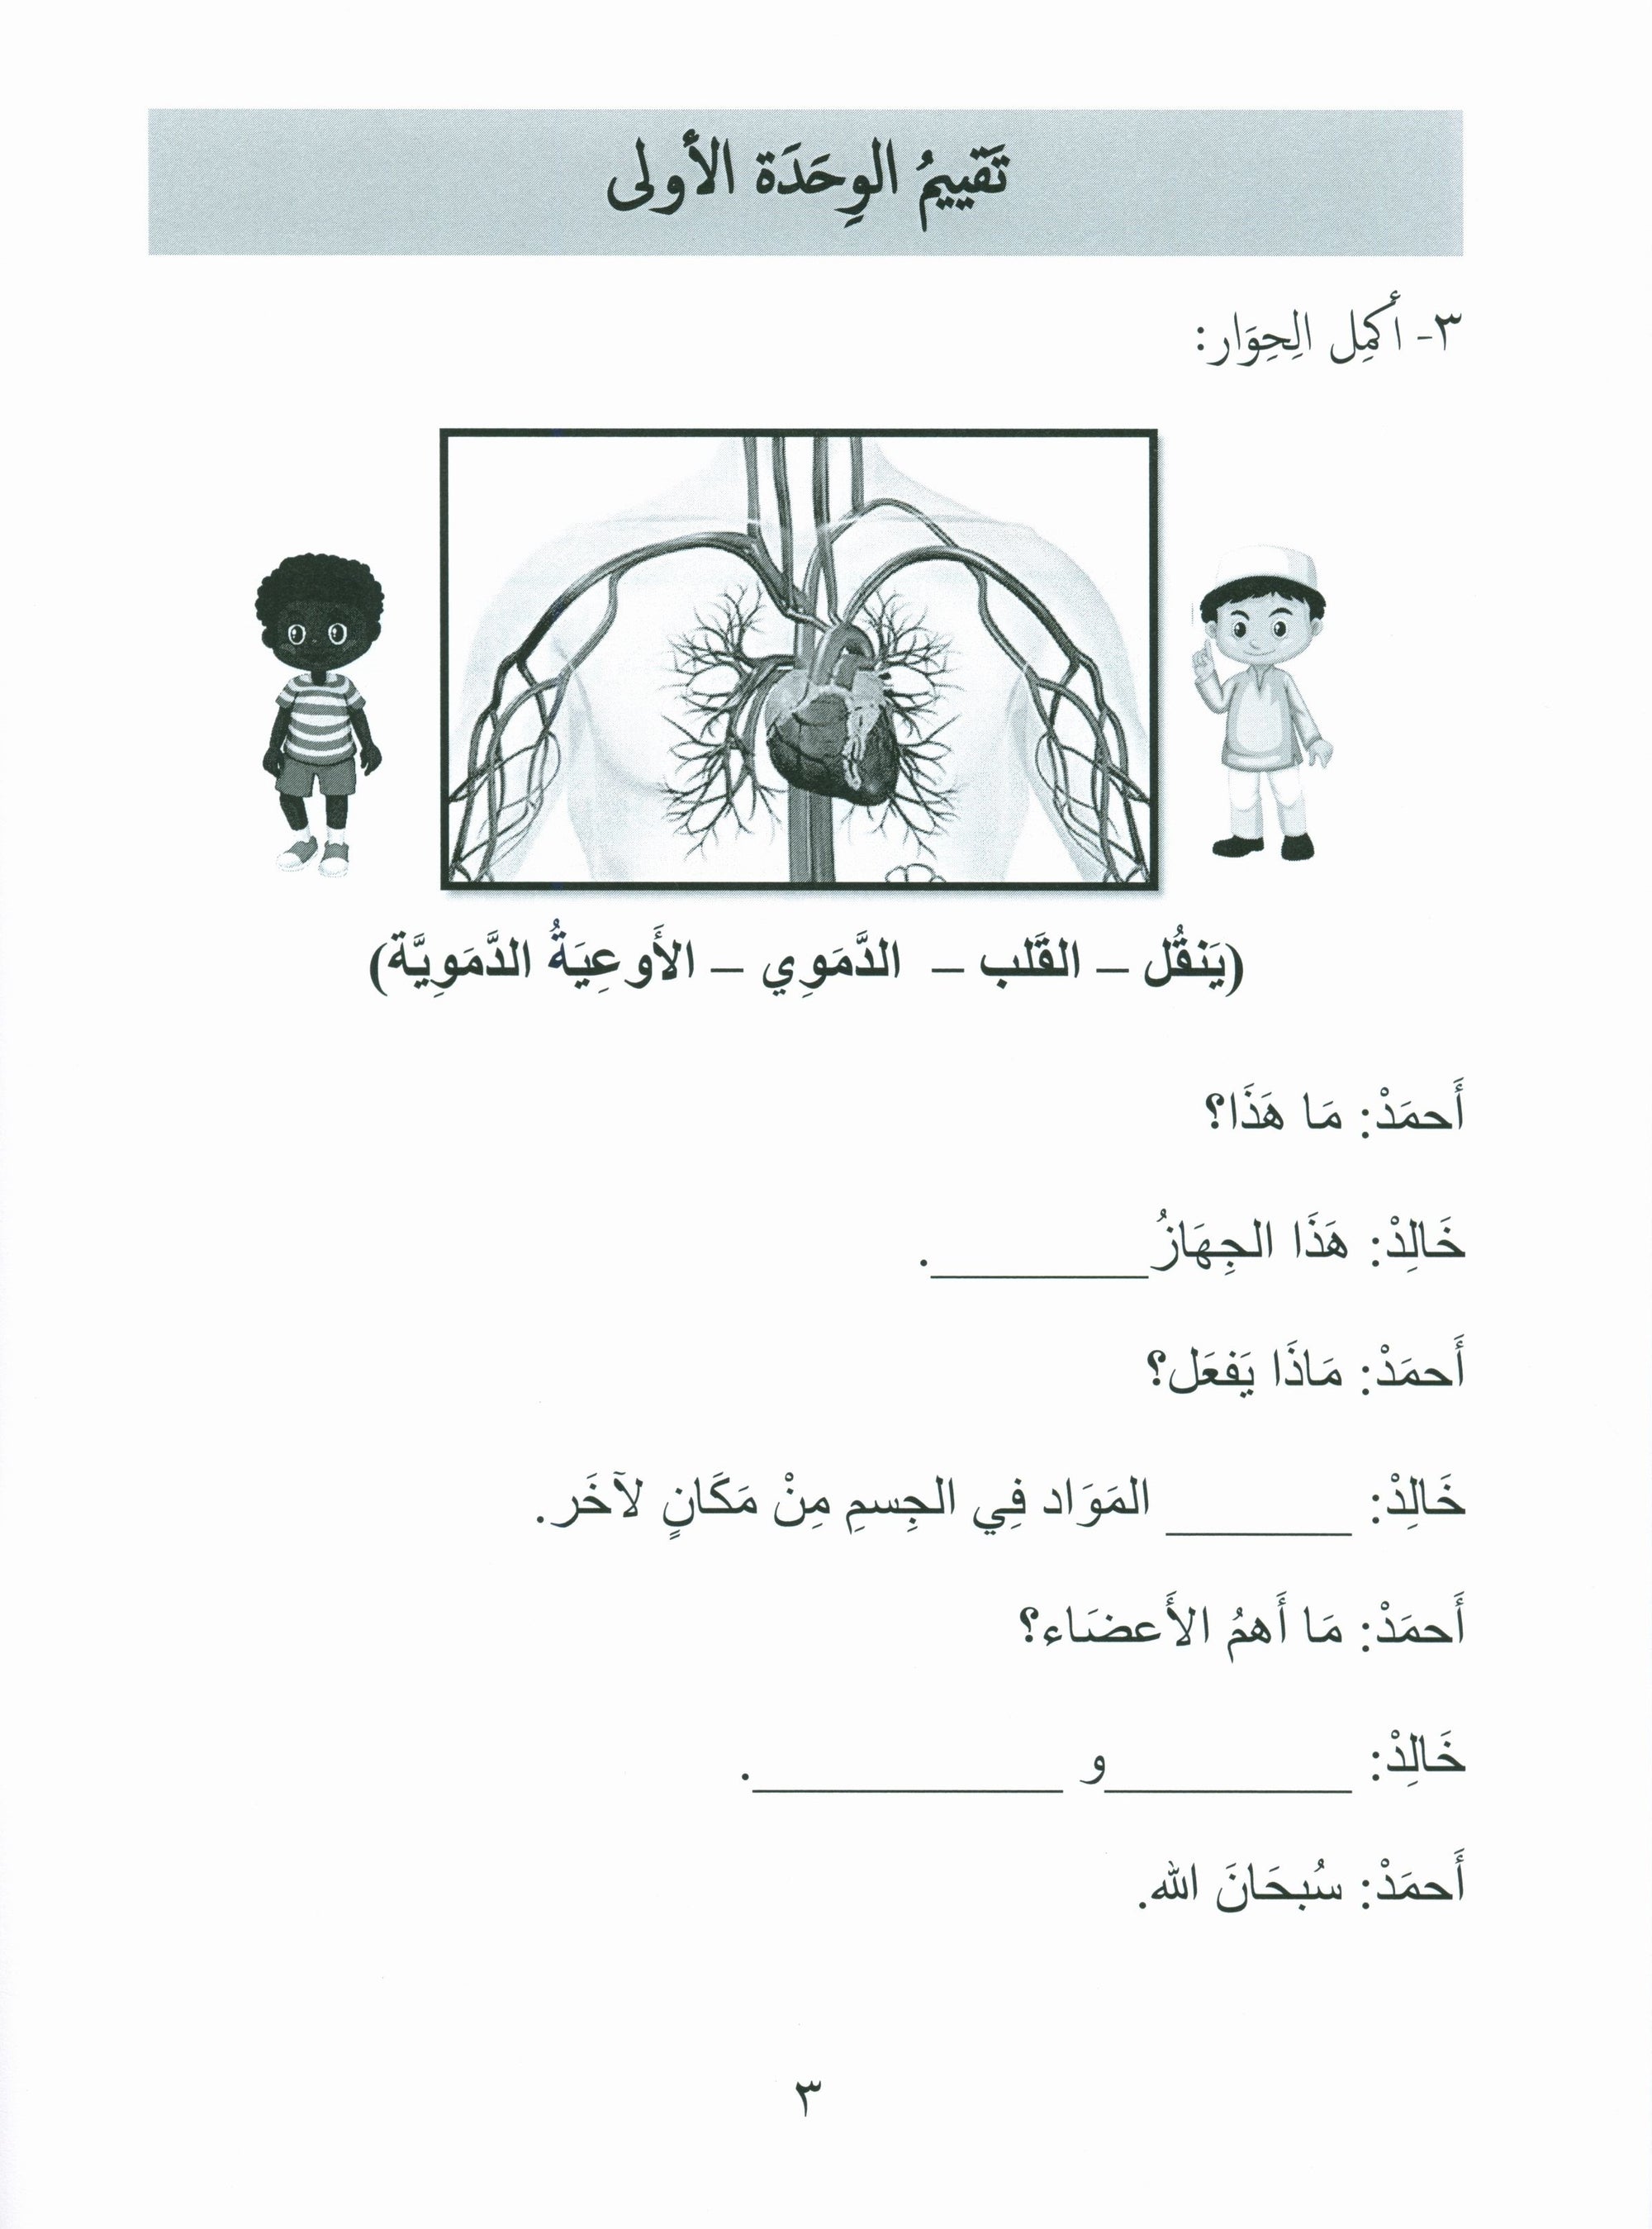 Our Language Is Our Pride Assessment Level 5 لغتنا فخرنا